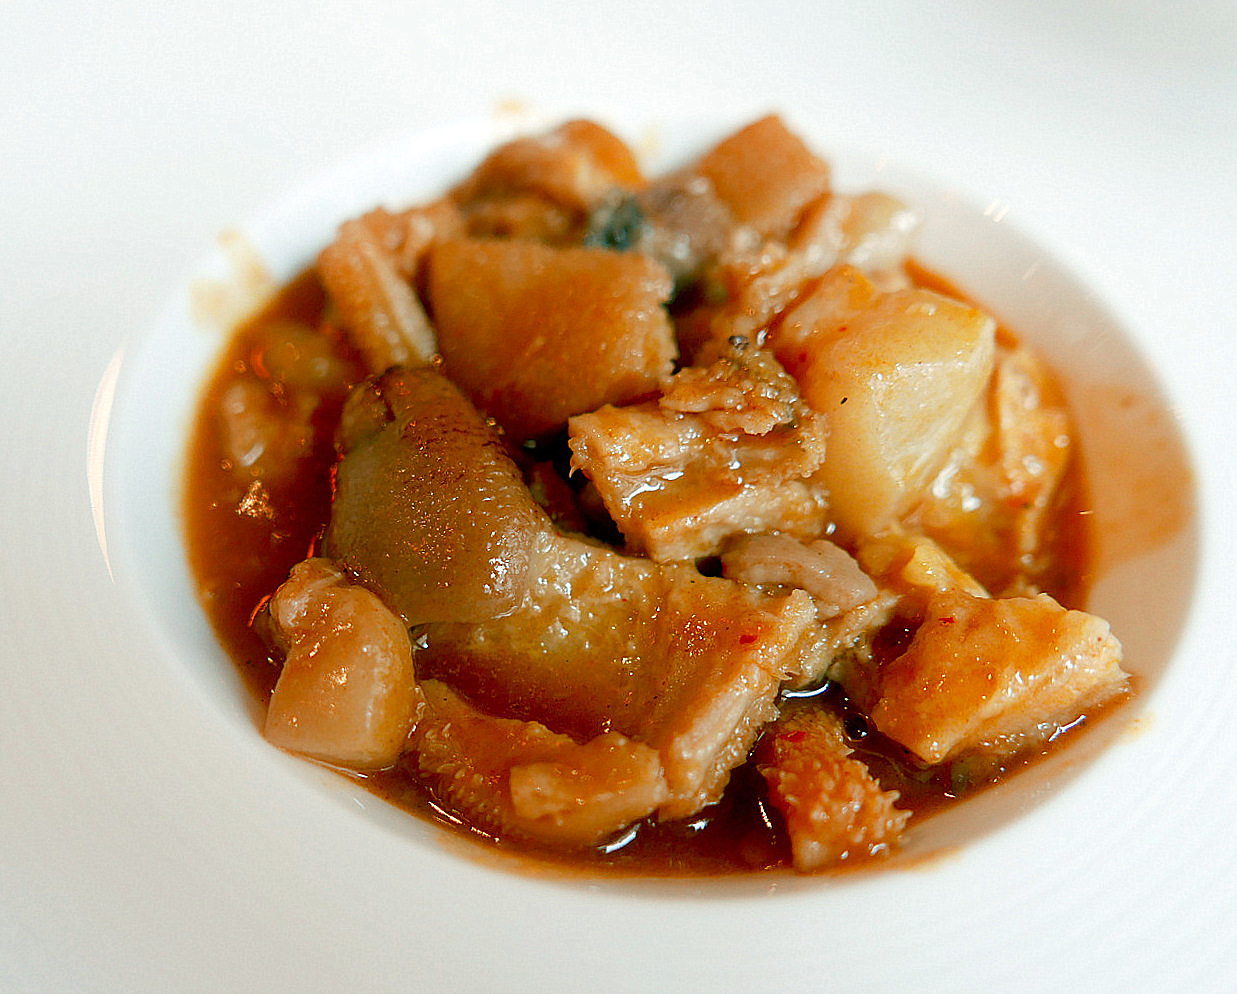 10. stewed tripe, succulent & flavoursome with tomatoes, herbs & spices